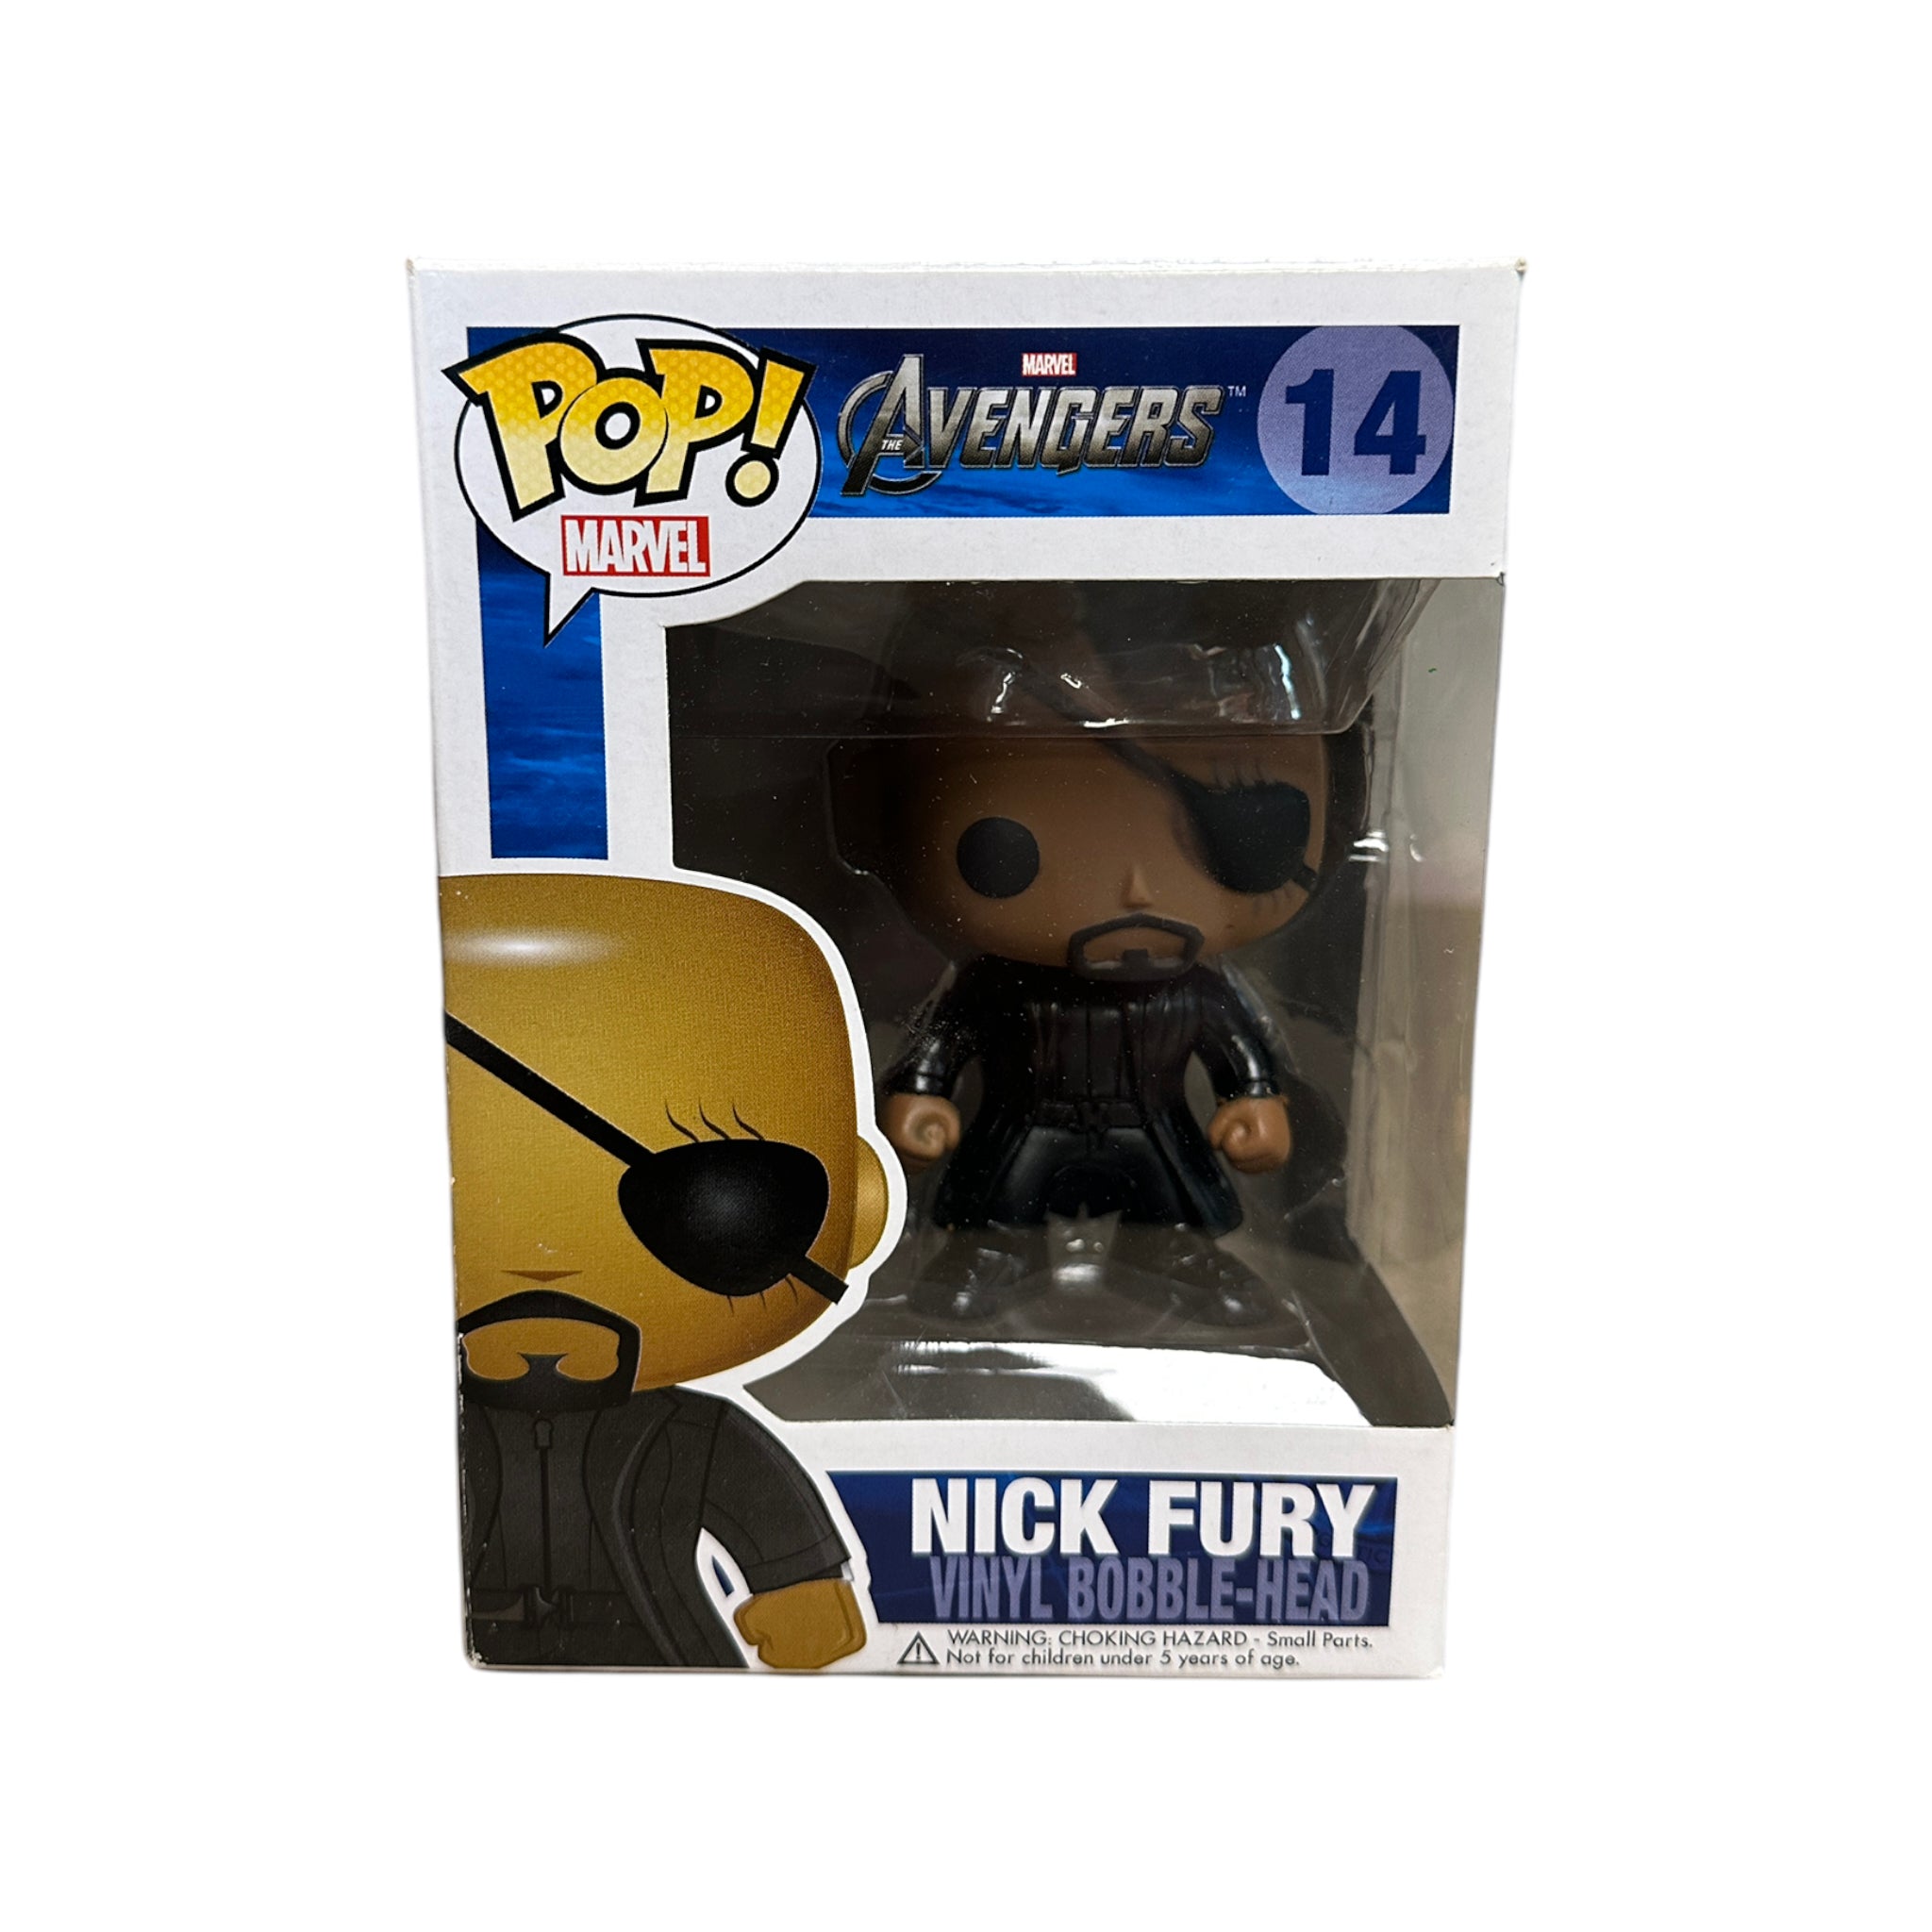 Nick Fury #14 (Large Writing) Funko Pop! - The Avengers - 2011 Pop! - Condition 6.5/10